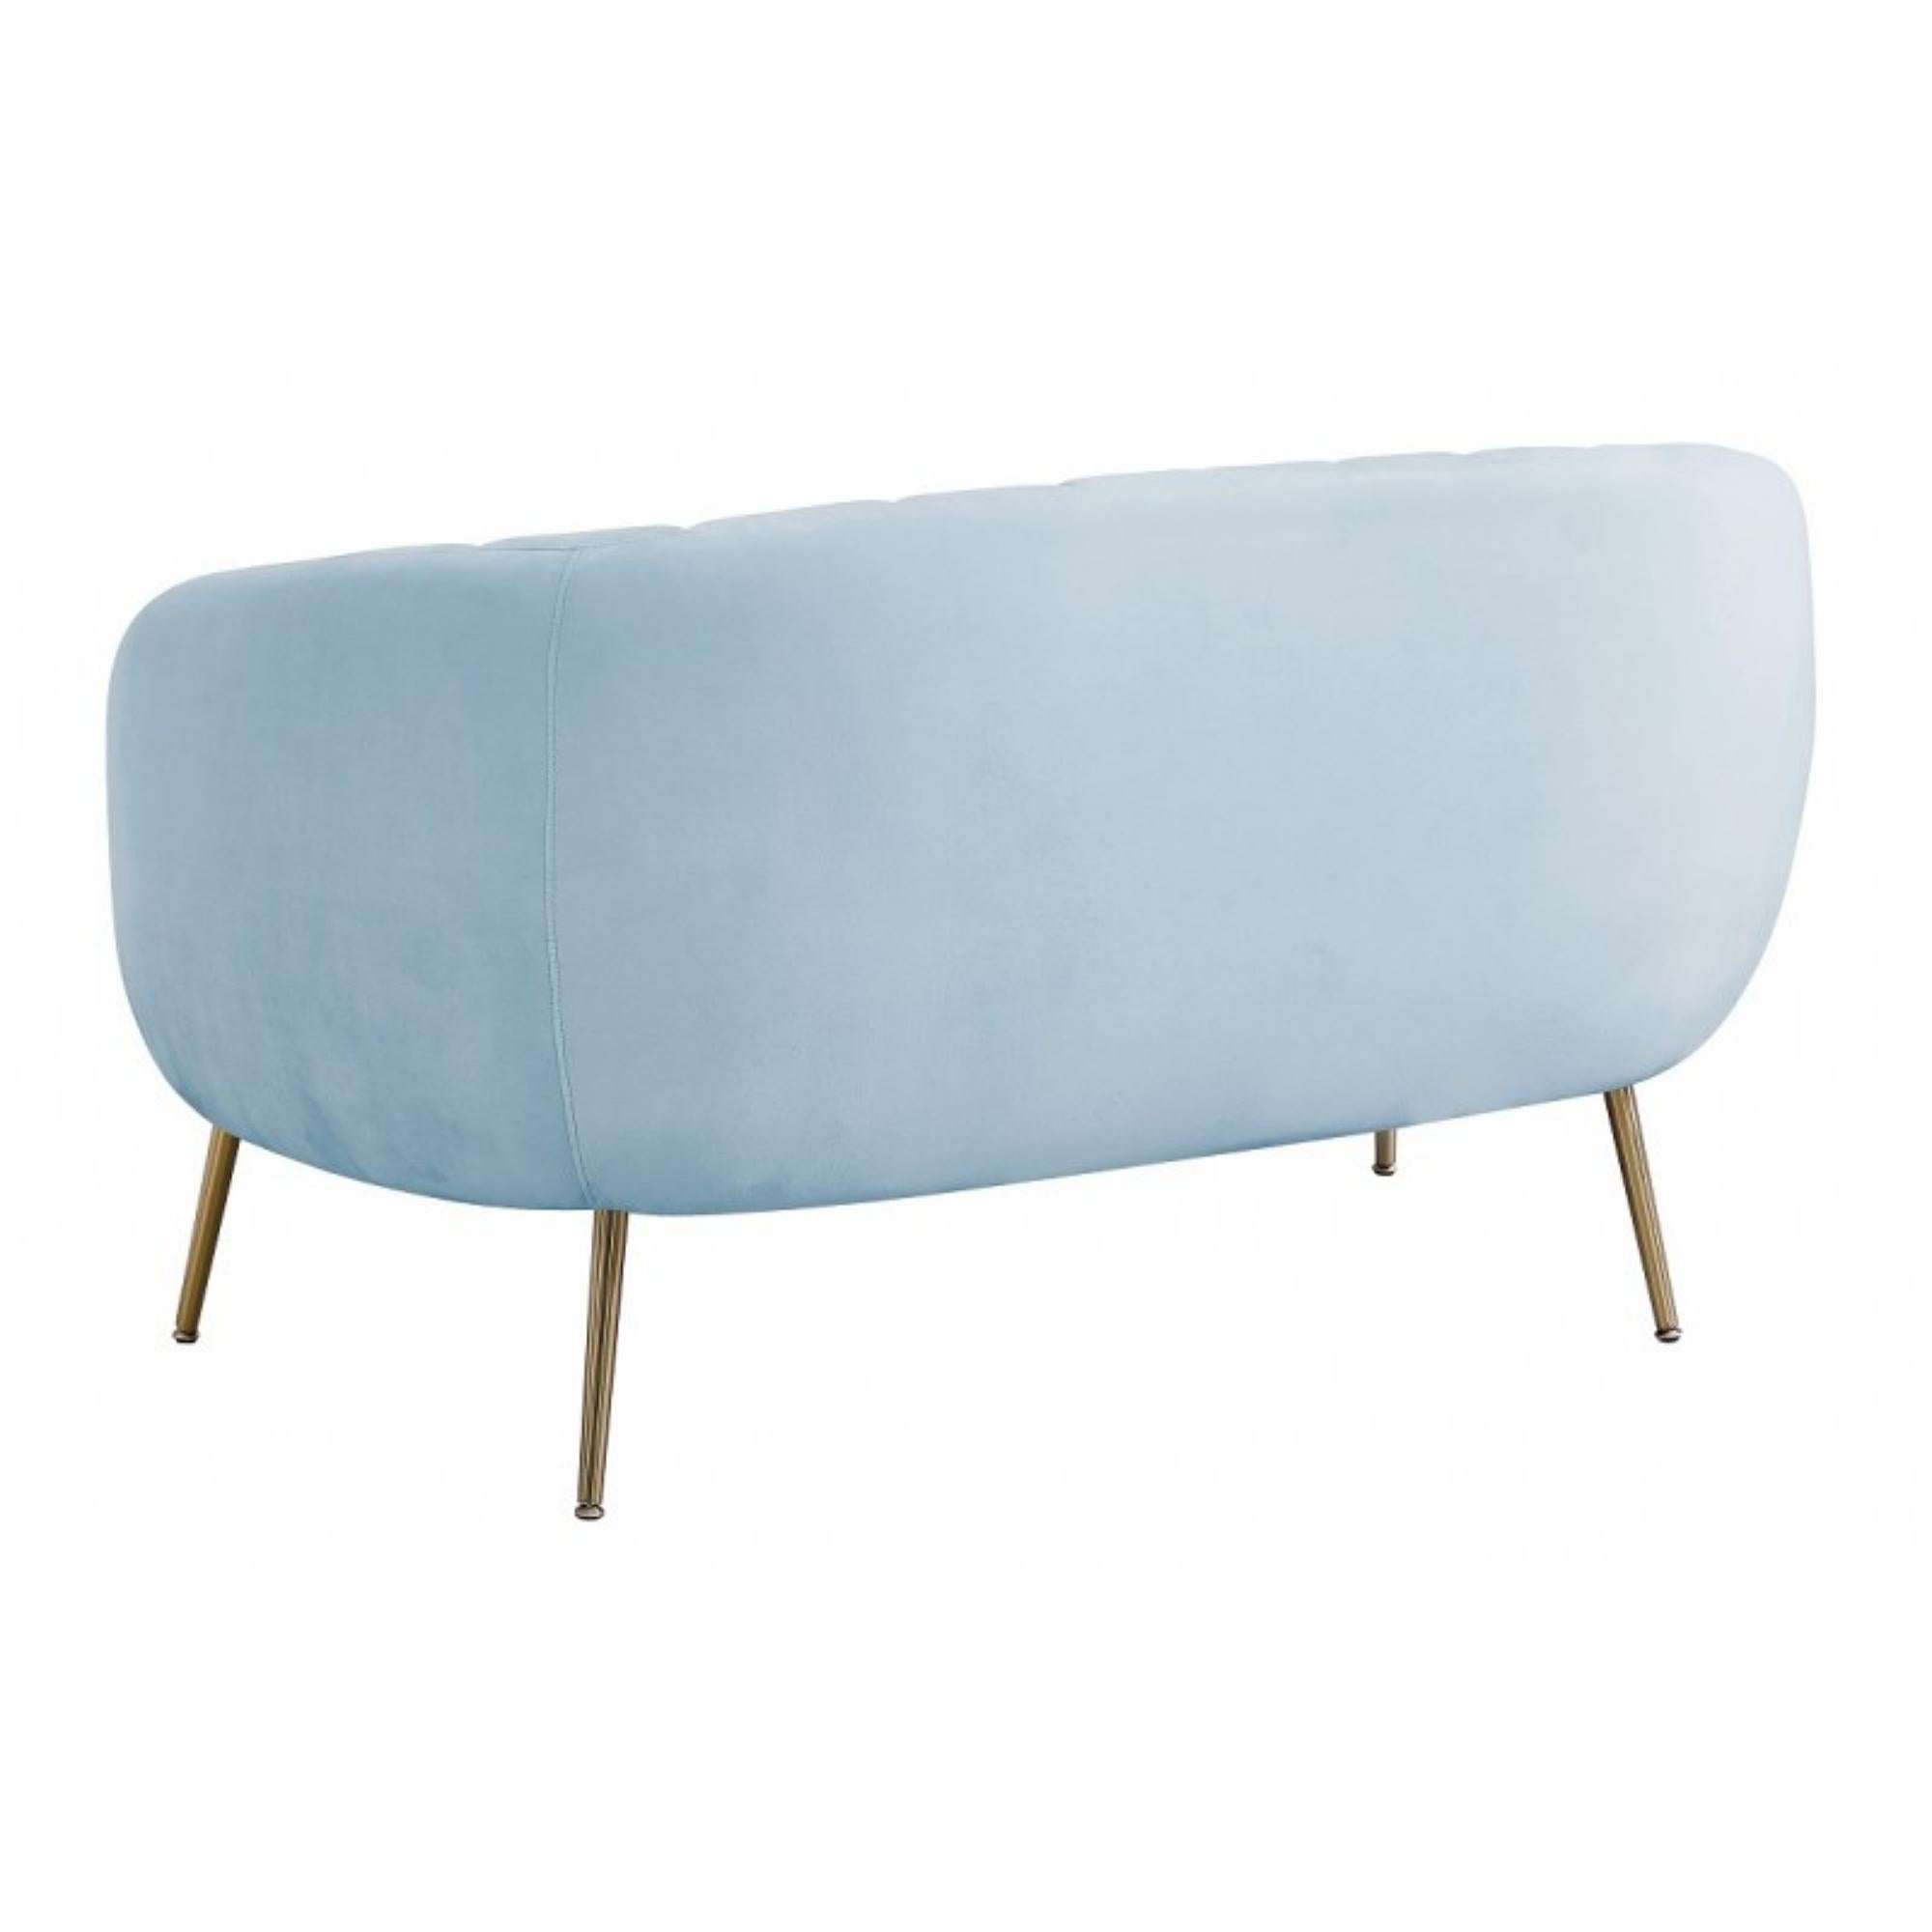 Light Blue Velvet Upholstered 2 seater sofa new.

DATA SHEET:

-Design sofa, 2 seats

-Made with solid wooden structure.

-High-density polyurethane foam.

-Upholstered in light blue 59 velvet fabric

-Metallic legs with gold